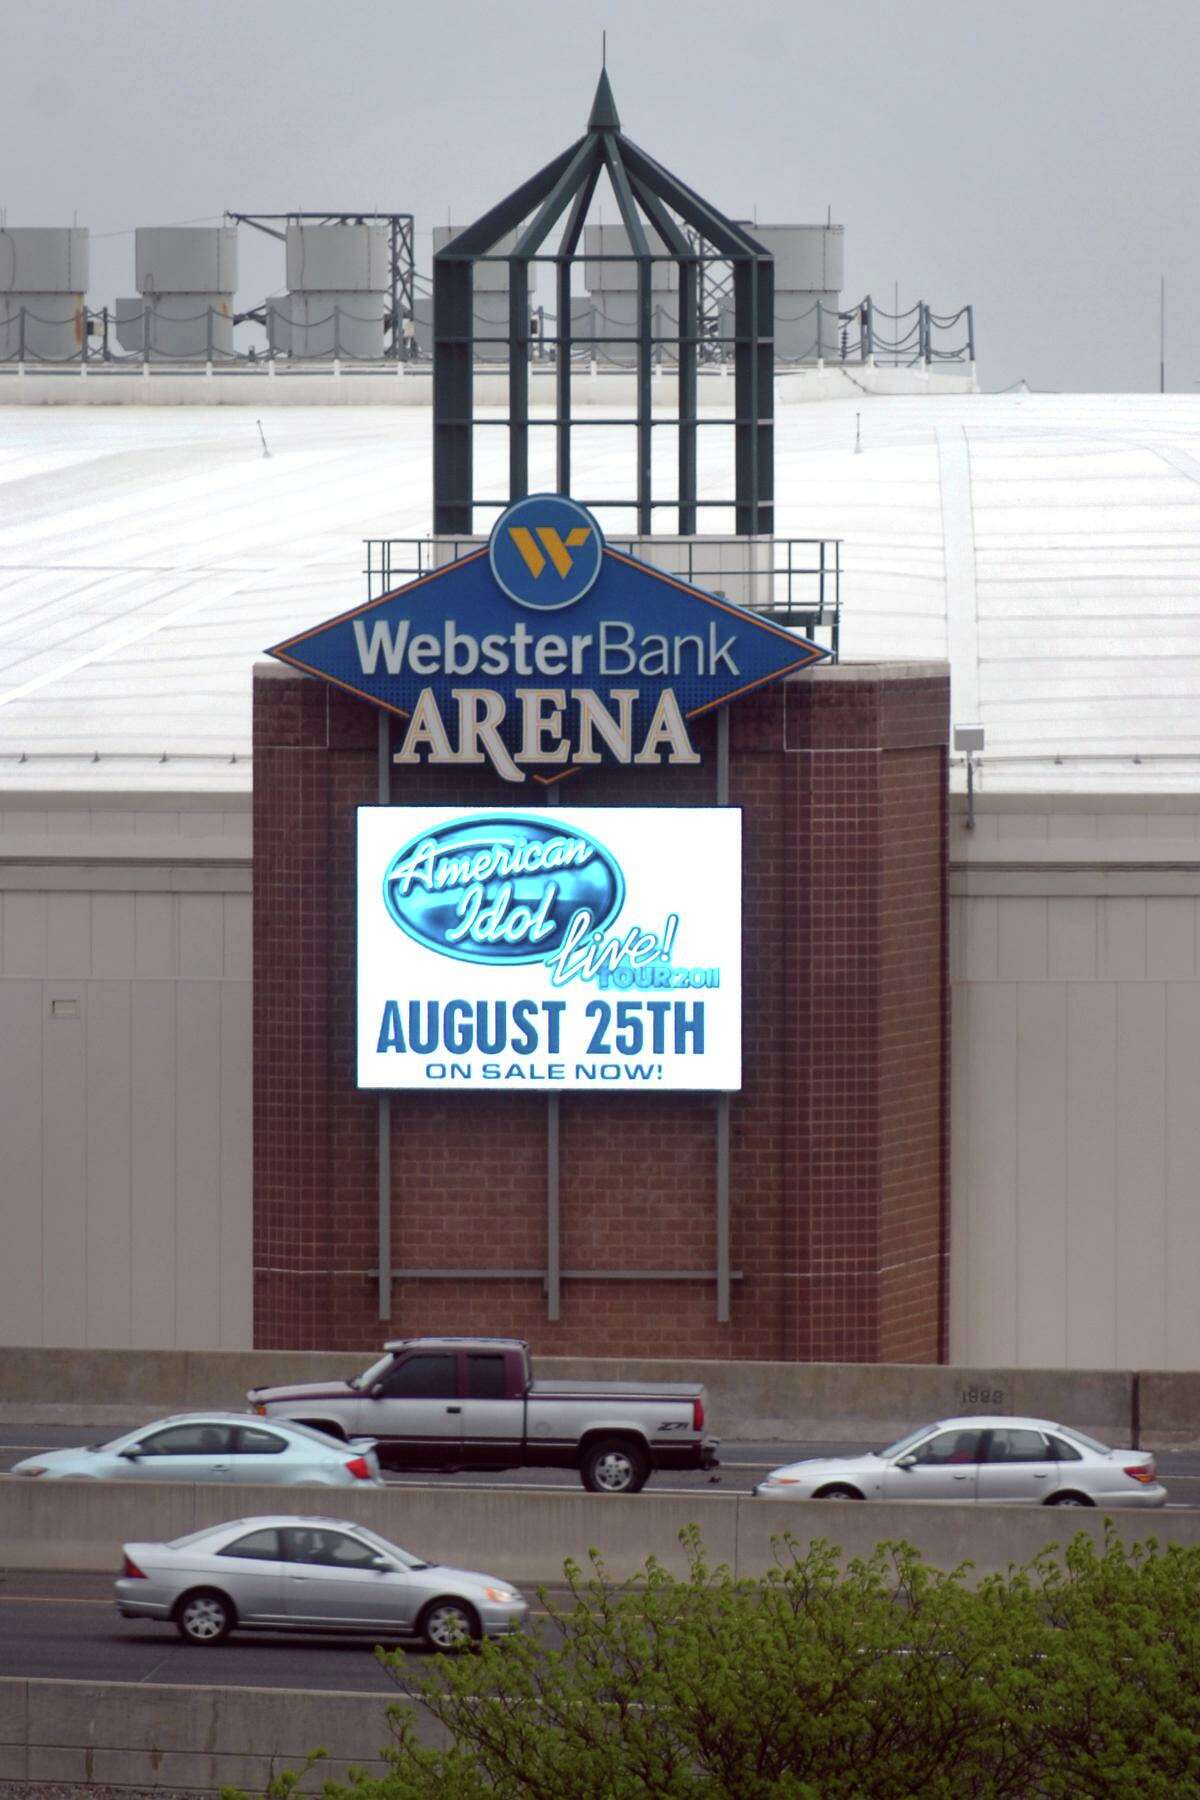 The state decided not to use Bridgeport’s Webster Bank arena for hospital overflow stemming from the coronovirus outbreak at this time.